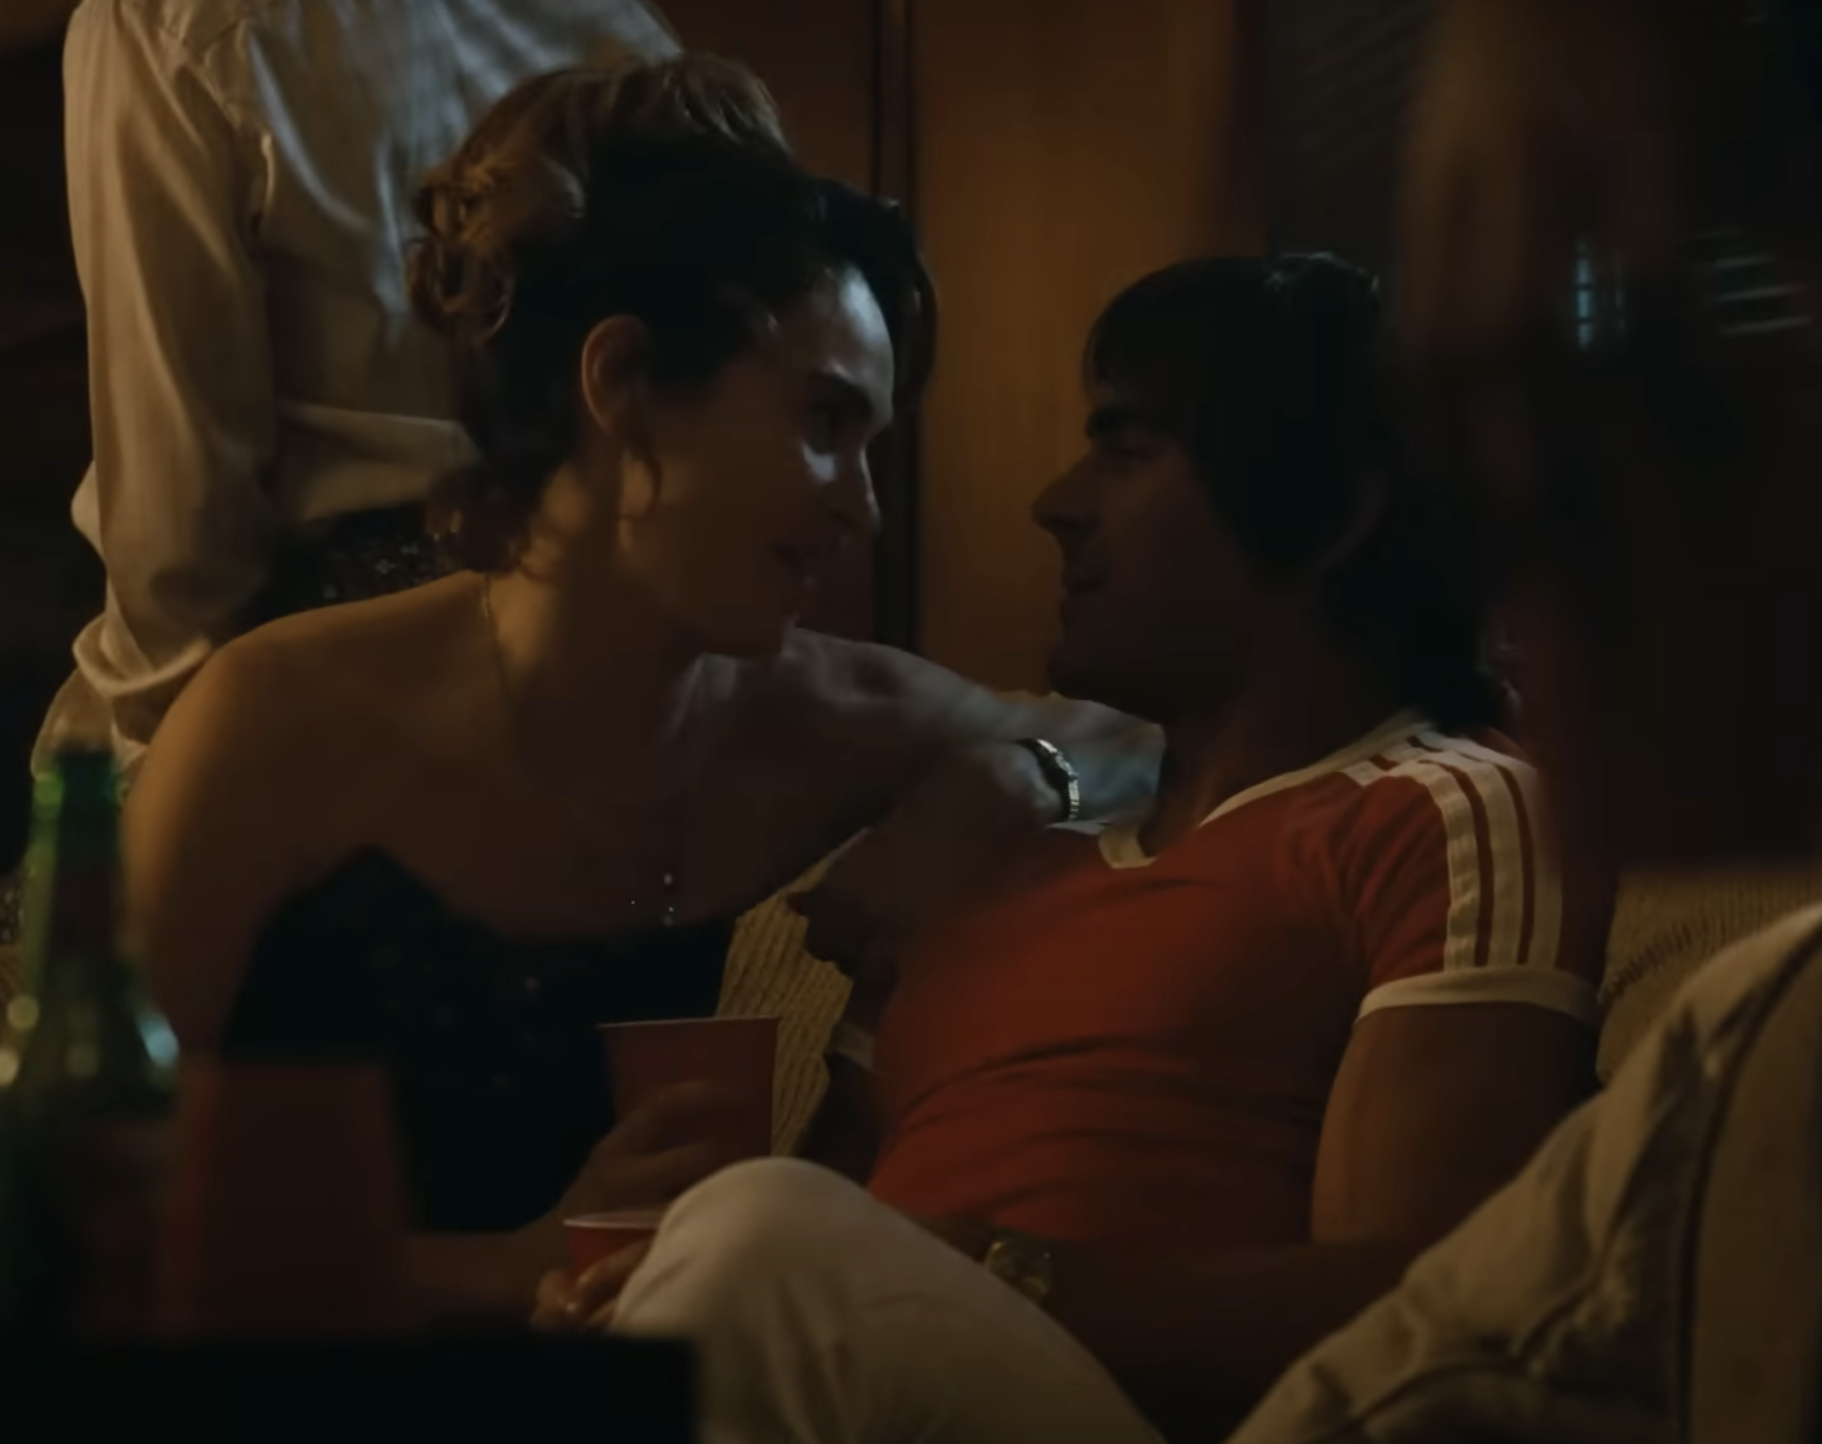 Zac with a woman in an intimate scene on a couch